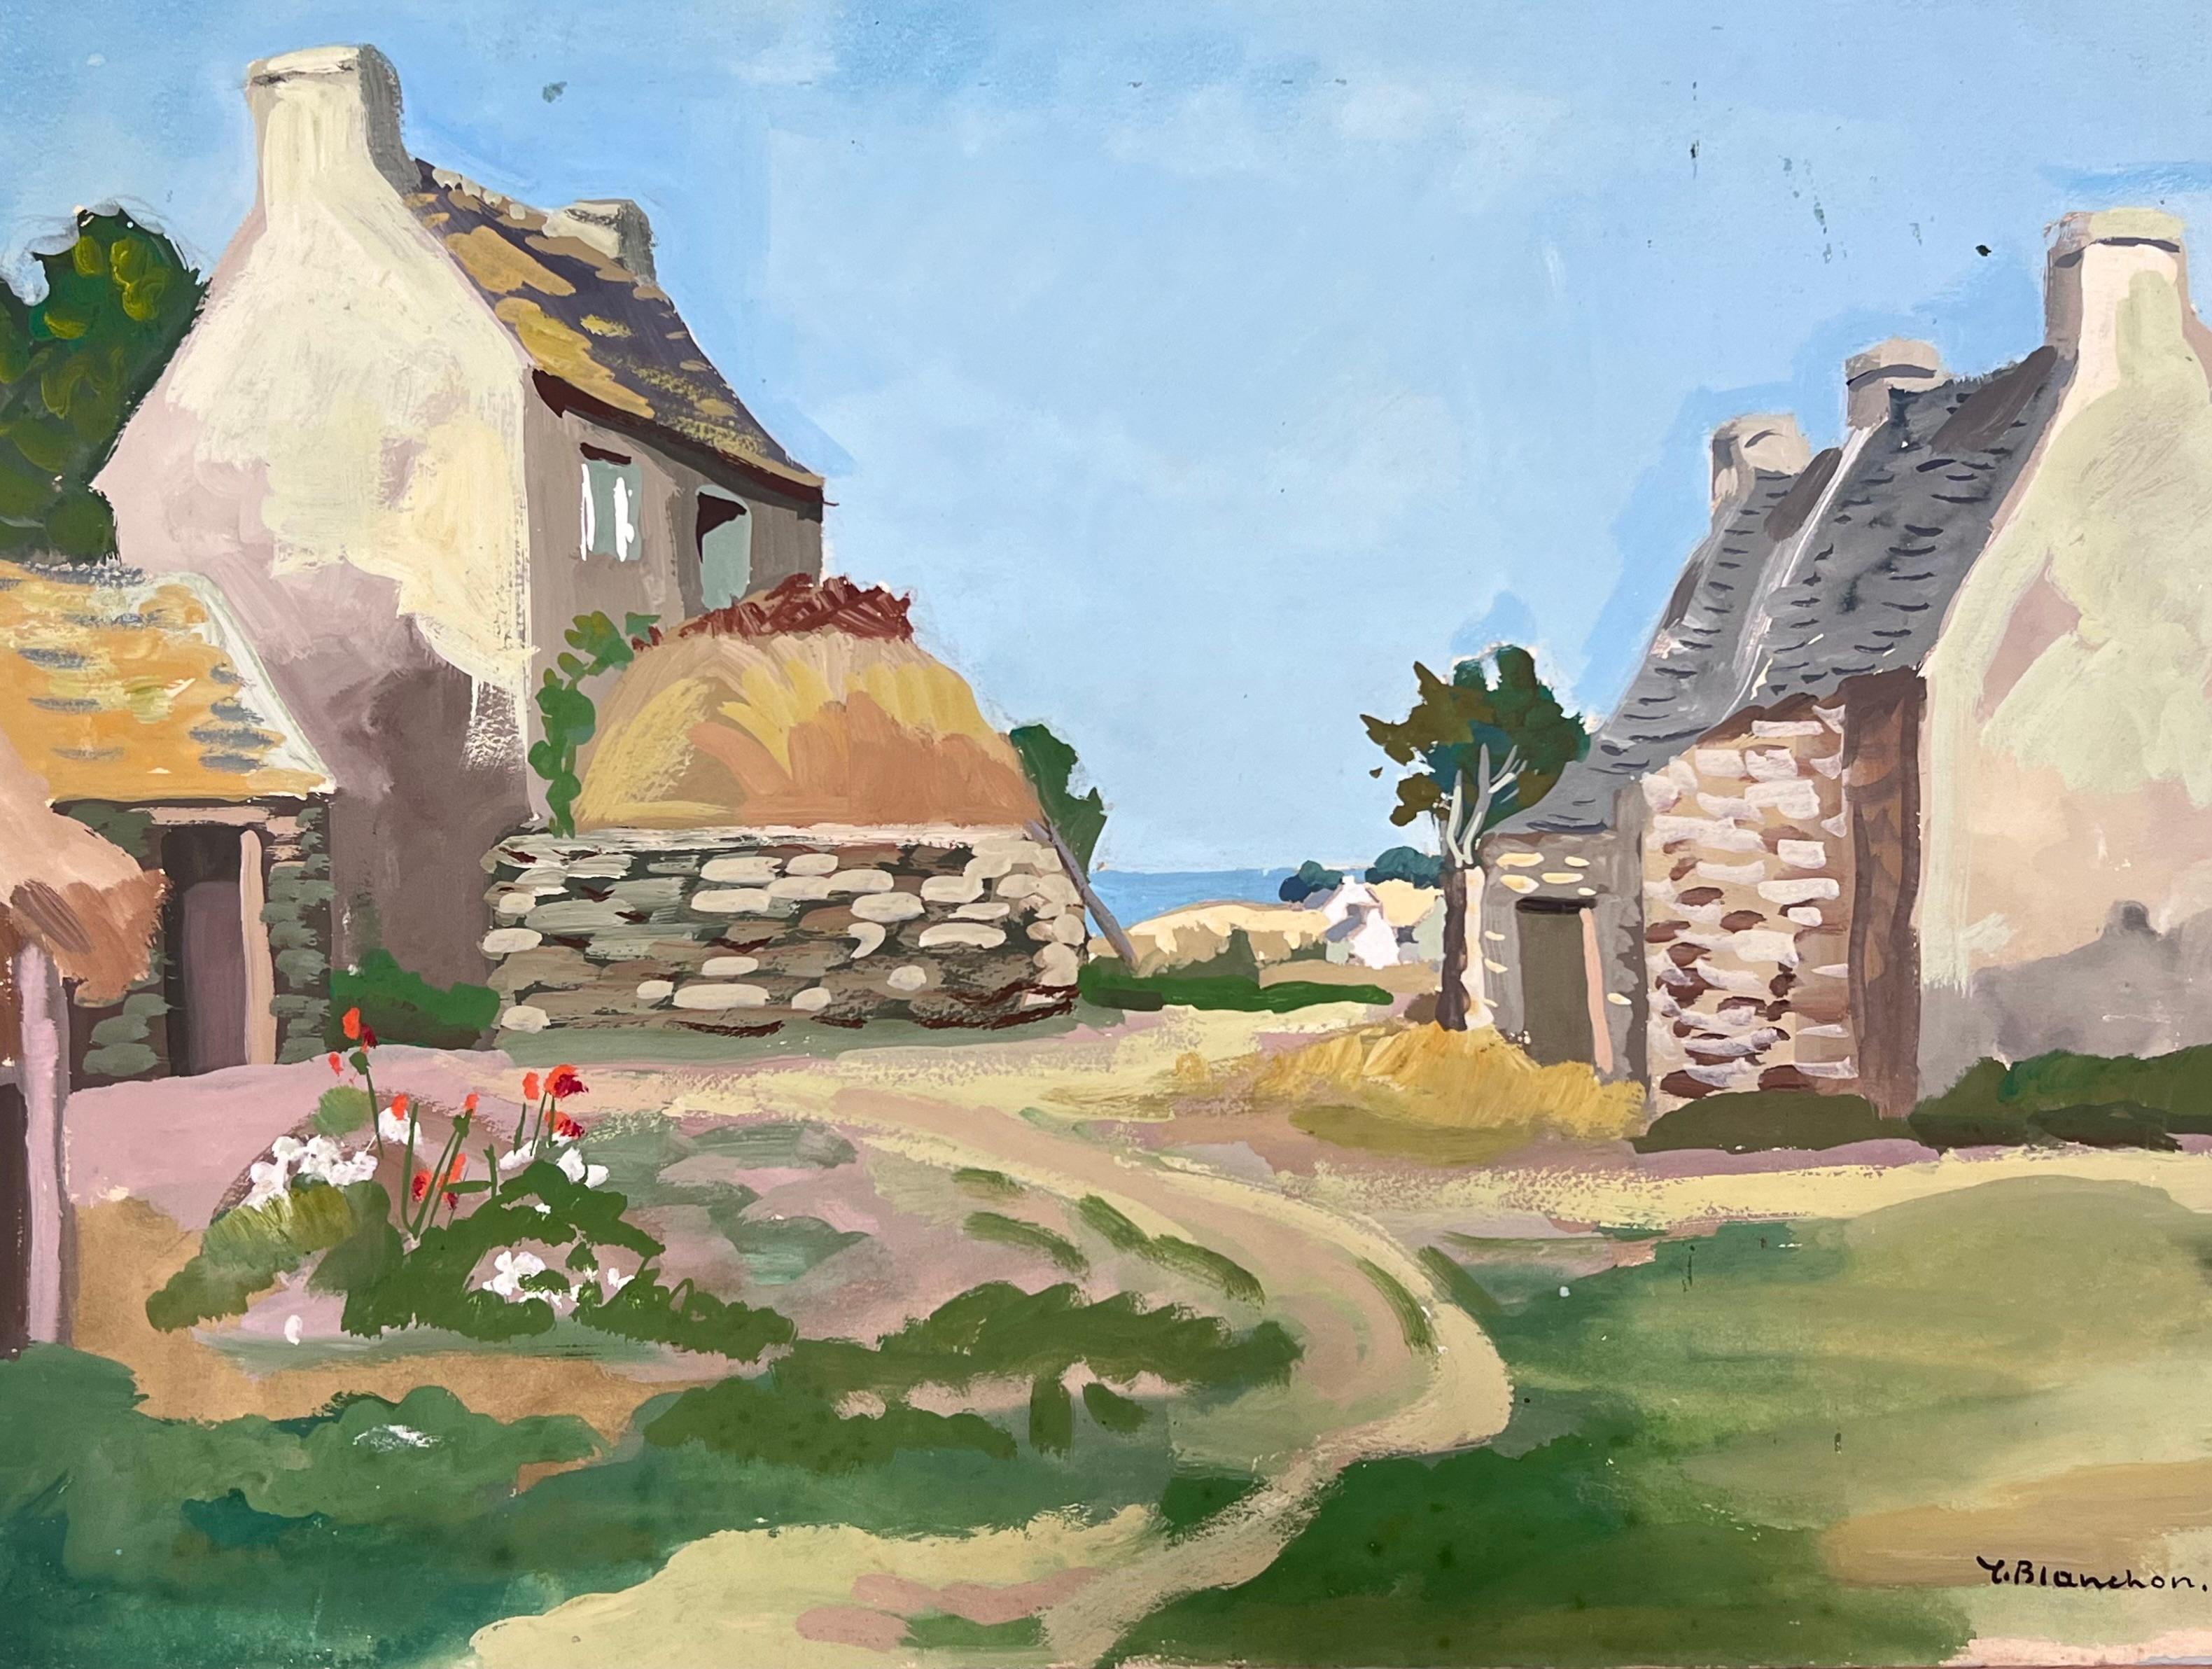 Sea Cottages
signed by Y. Blanchon, French 1950's Impressionist 
artist gouache on artist paper, unframed
painting: 12.5 x 16.5 inches
inscribed verso
provenance: from a large private collection of this artists work in Northern France
condition: